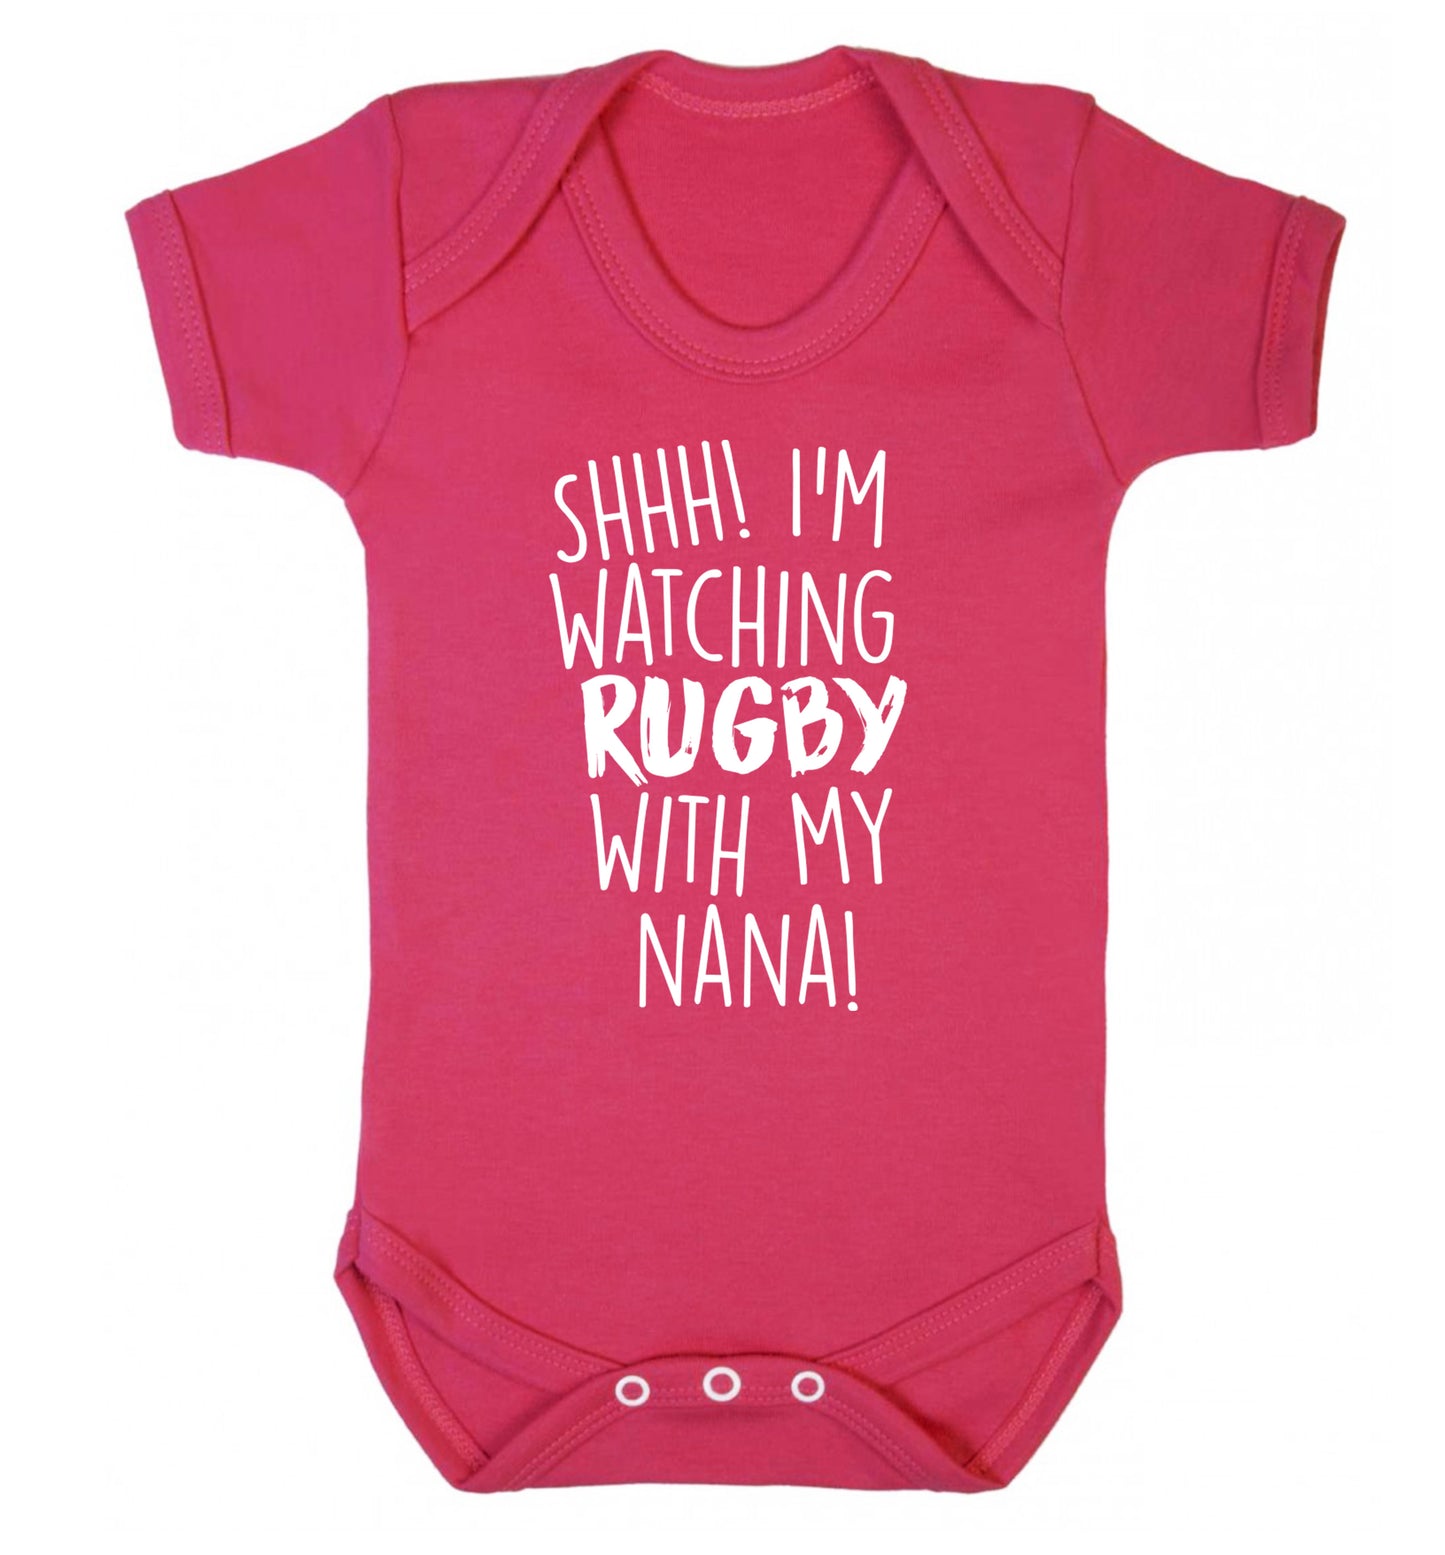 Shh I'm watching rugby with my nana Baby Vest dark pink 18-24 months